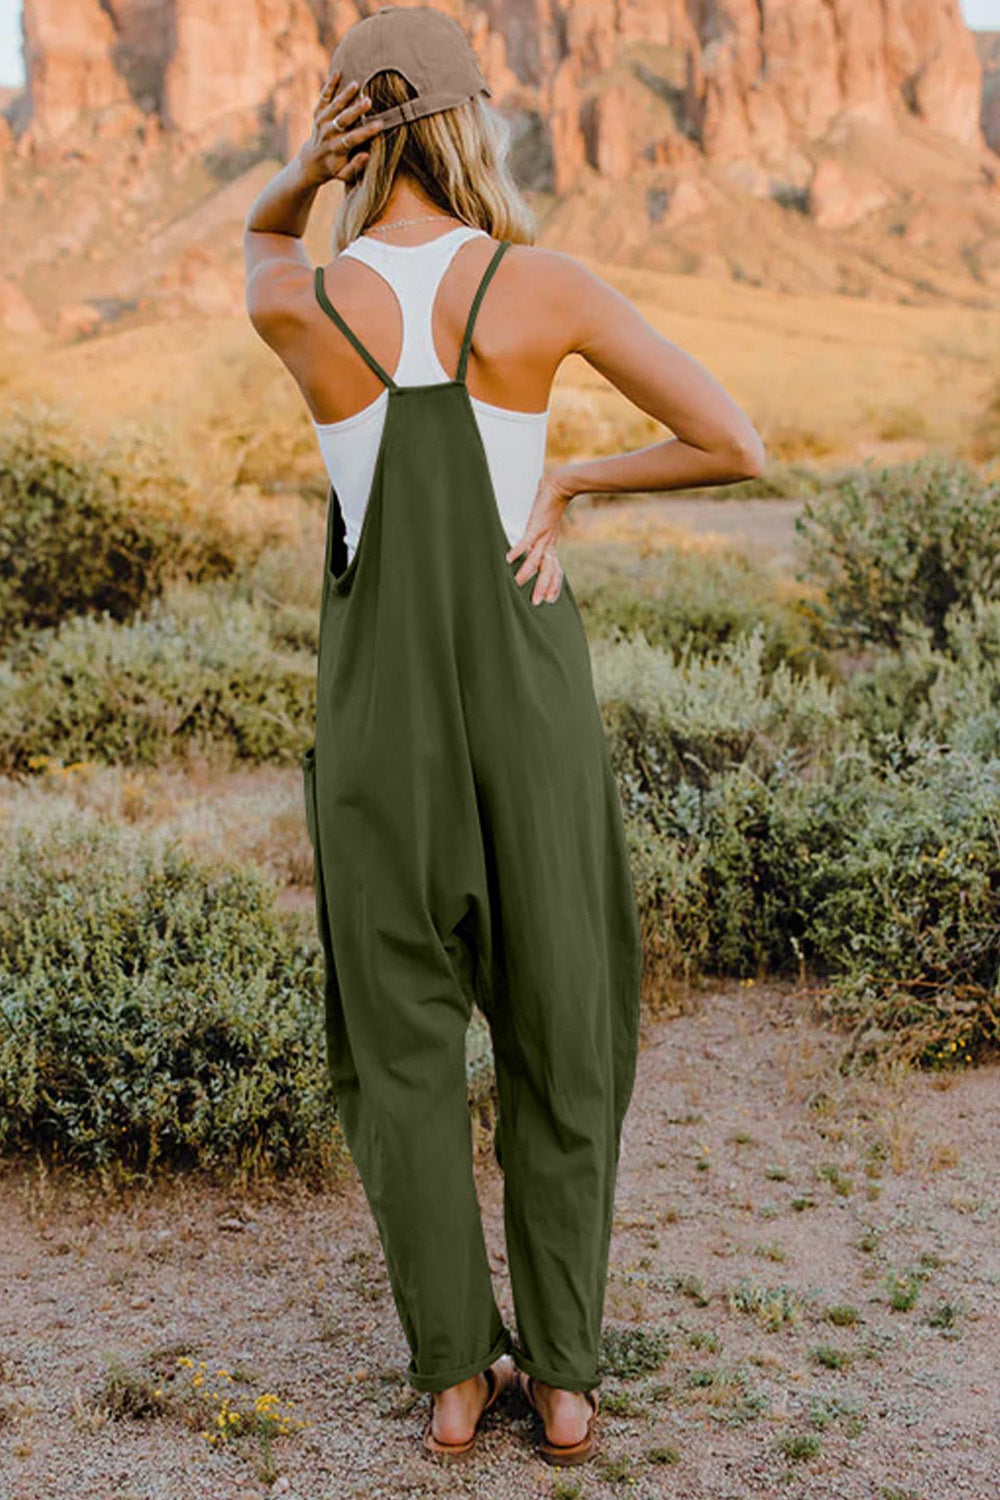 Double Take  V-Neck Sleeveless Jumpsuit with Pocket Print on any thing USA/STOD clothes